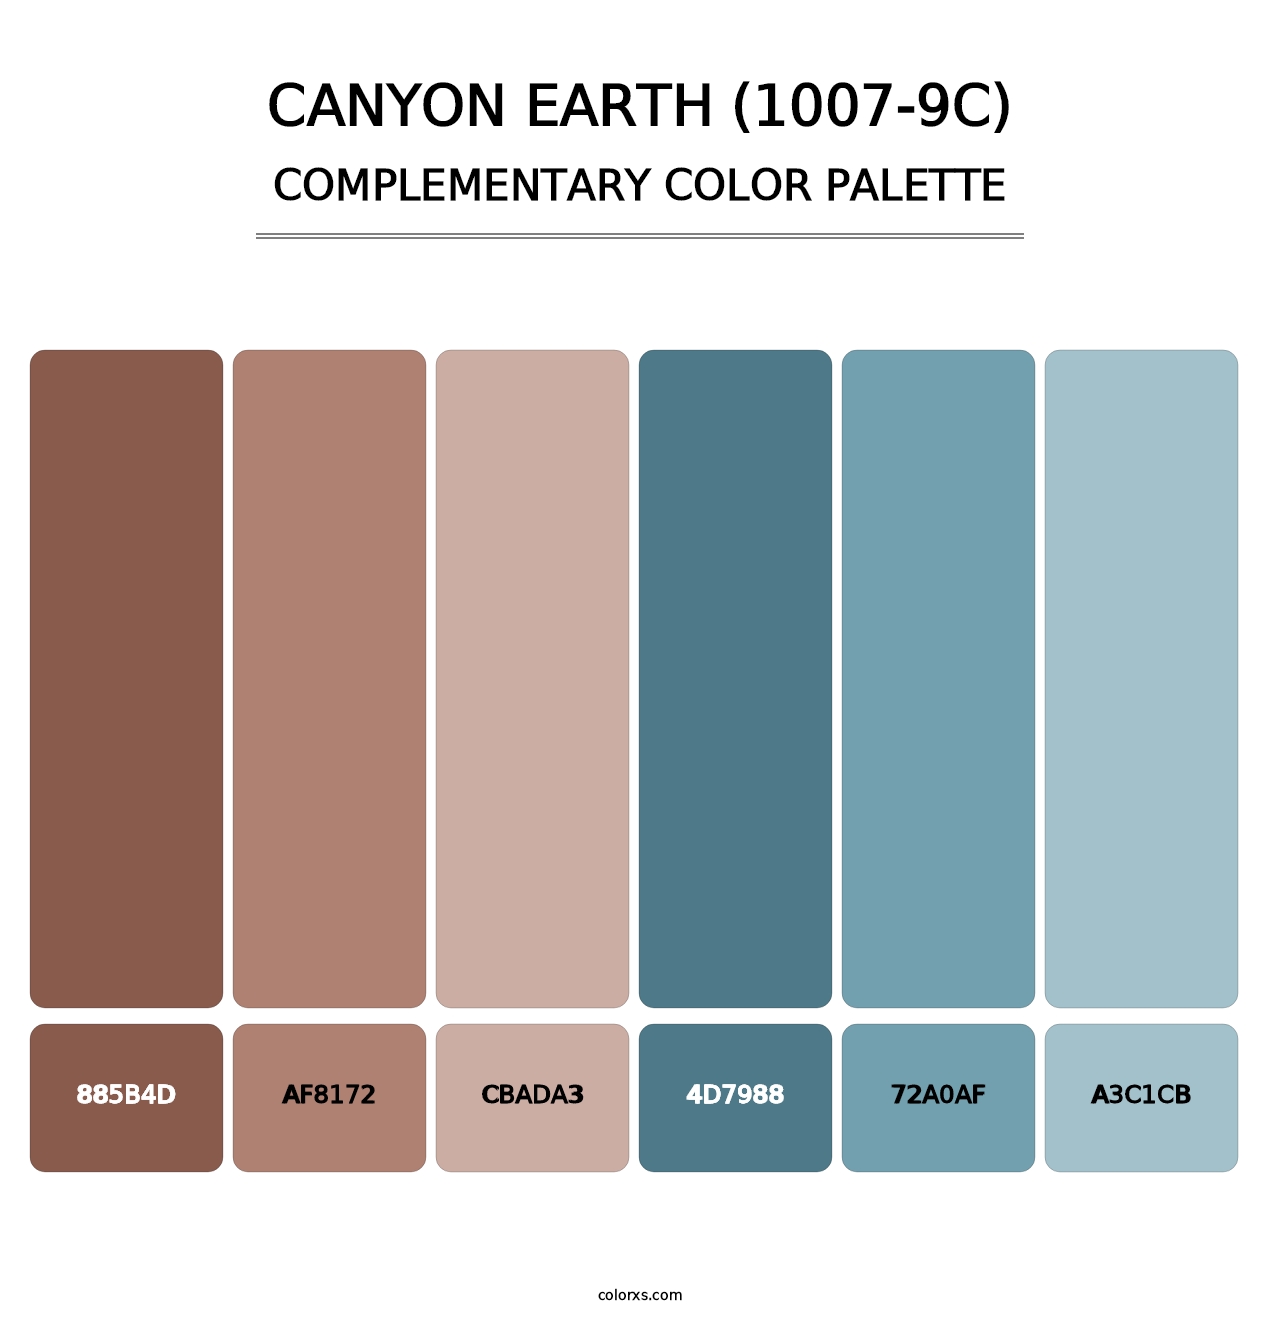 Canyon Earth (1007-9C) - Complementary Color Palette